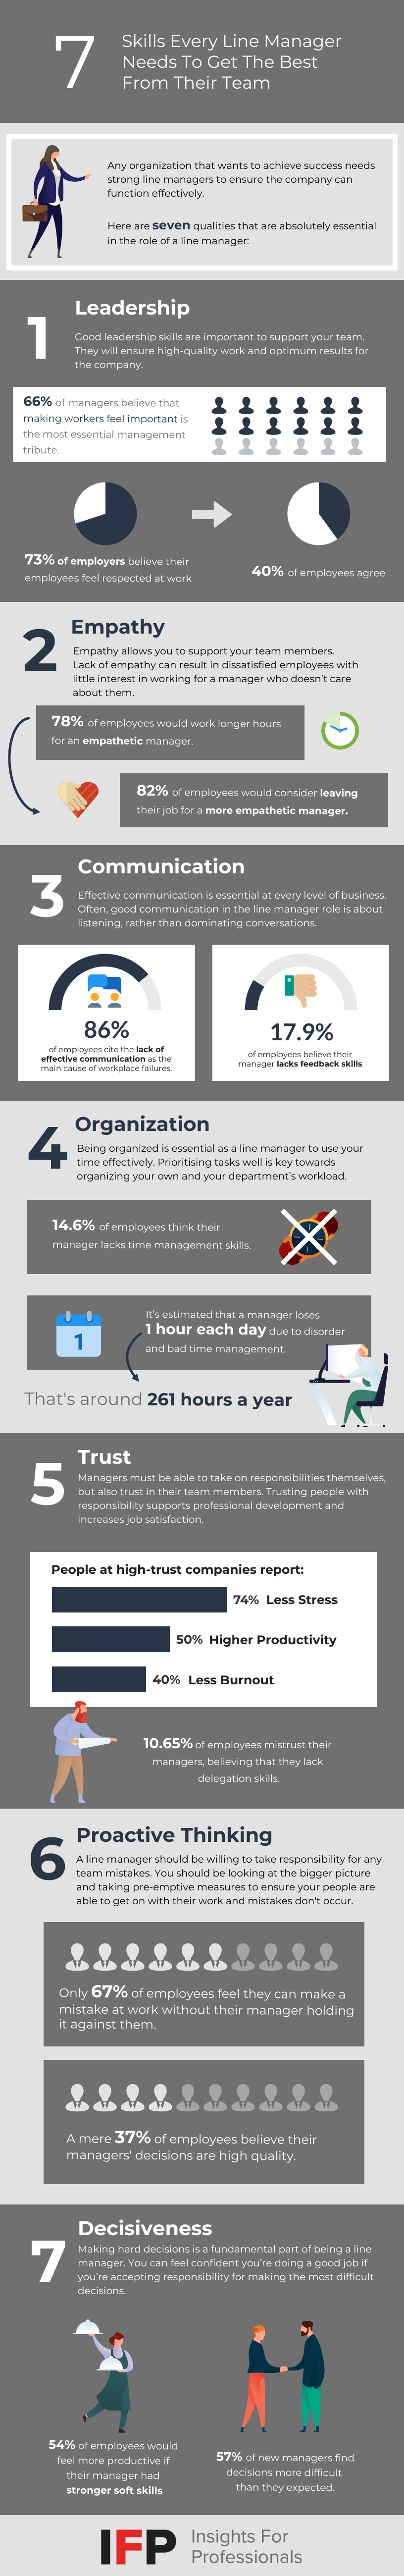 IFP infographic visual showing 7 of the most important skills line managers need to ensure productivity from their team